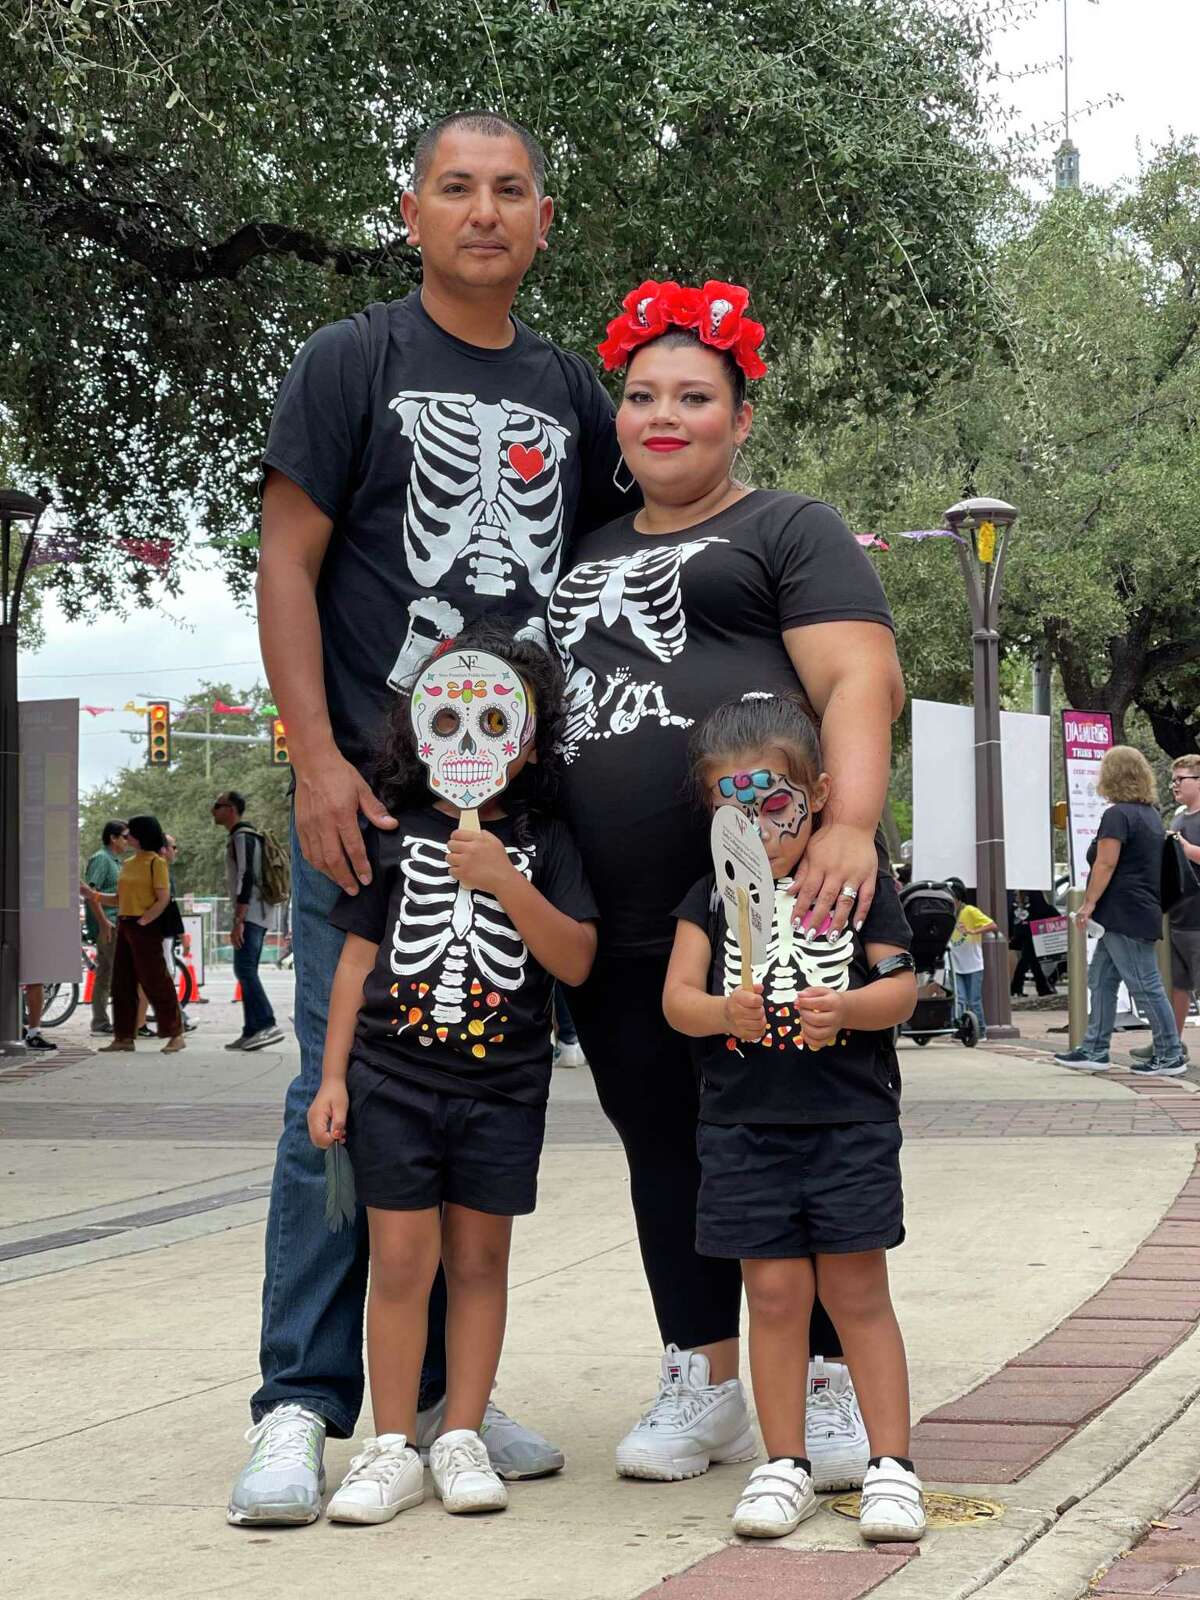 Melissa Cardona, from Honduras, and Carlos Aguilar, from Mexico, and their two daughters. The family drove from Houston for Muertos Fest because their young daughters, Belen and Fernanda, are “obsessed” with “Coco,” the Disney Pixar animation about the tradition.